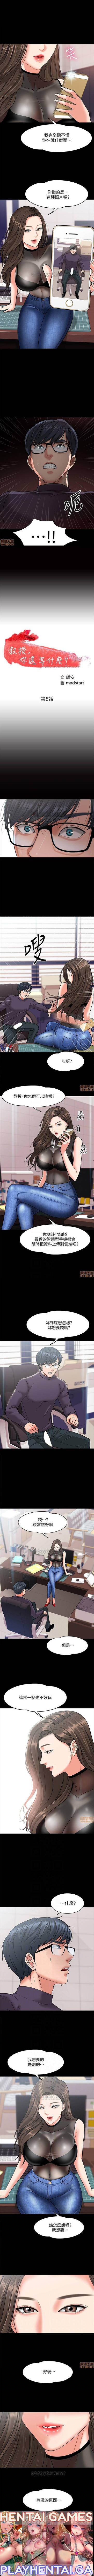 PROFESSOR, ARE YOU JUST GOING TO LOOK AT ME? | DESIRE SWAMP | 教授，你還等什麼? Ch. 5Manhwa 2